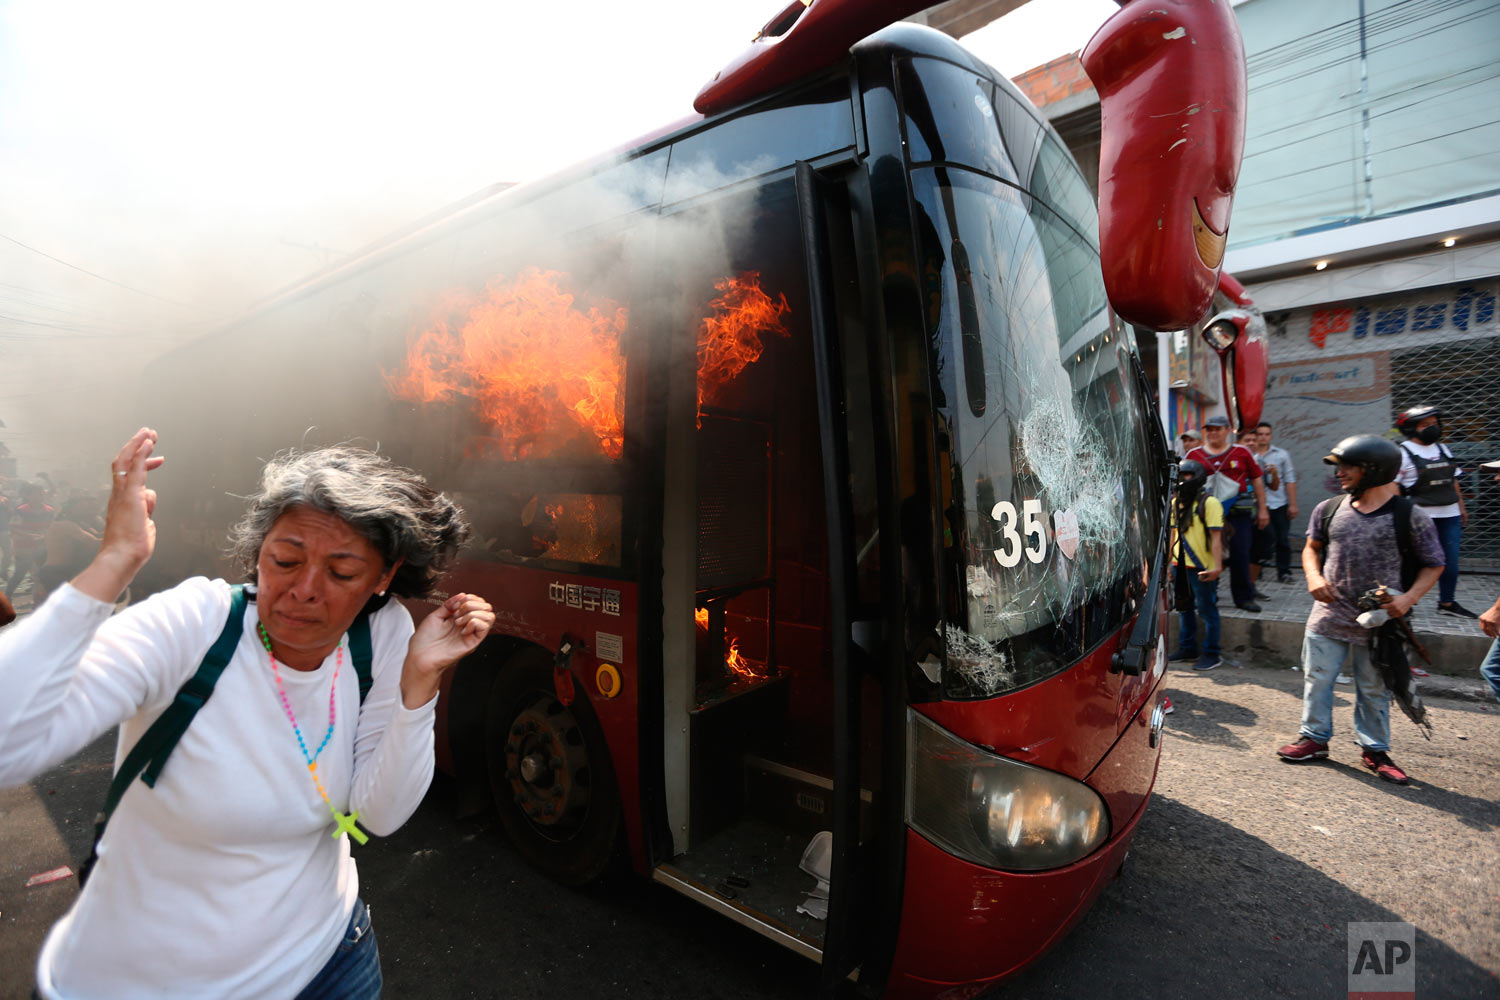  A woman moves away from the flames of a burning bus after it was pushed away during clashes with the Venezuelan Bolivarian National Guard in Urena, Venezuela, near the border with Colombia, Saturday, Feb. 23, 2019. (AP Photo/Fernando Llano) 